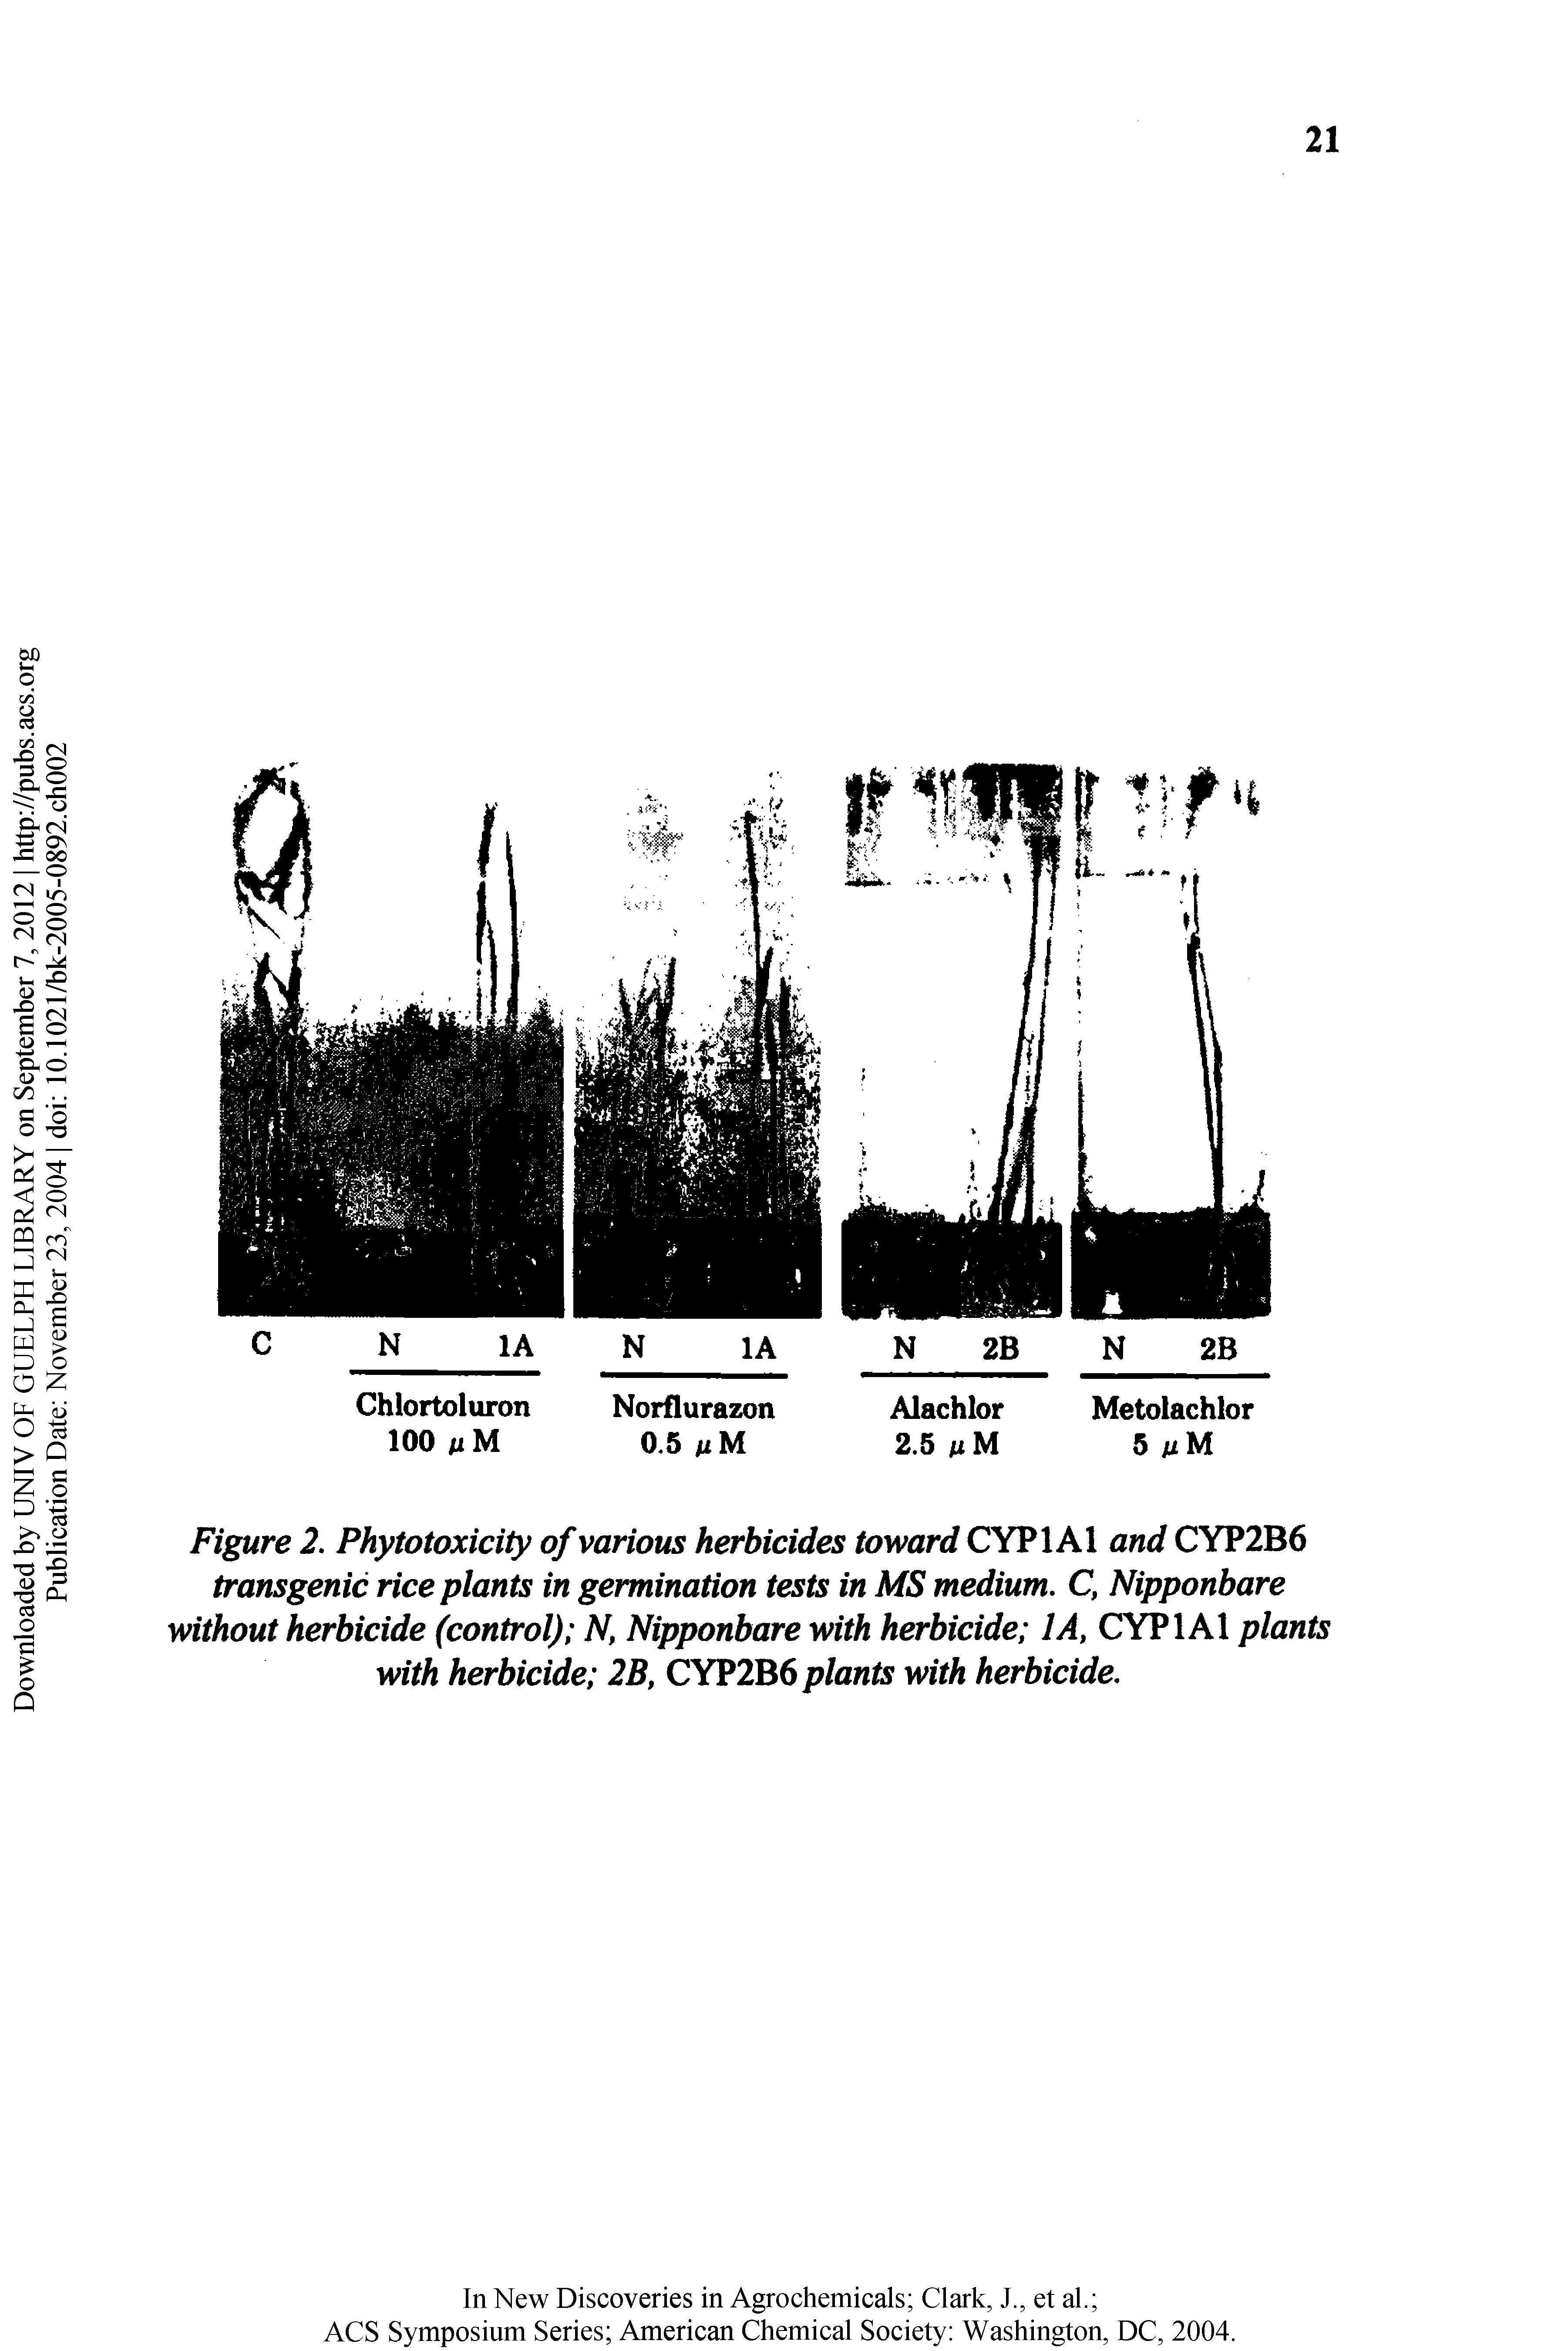 Figure 2, Phytotoxicity of various herbicides toward CYPlAl and CYP2B6 transgenic rice plants in germination tests in MS medium, C, Nipponbare without herbicide (control) N, Nipponbare with herbicide lA, CYPlAl plants with herbicide 2B, CYP2B6 plants with herbicide.